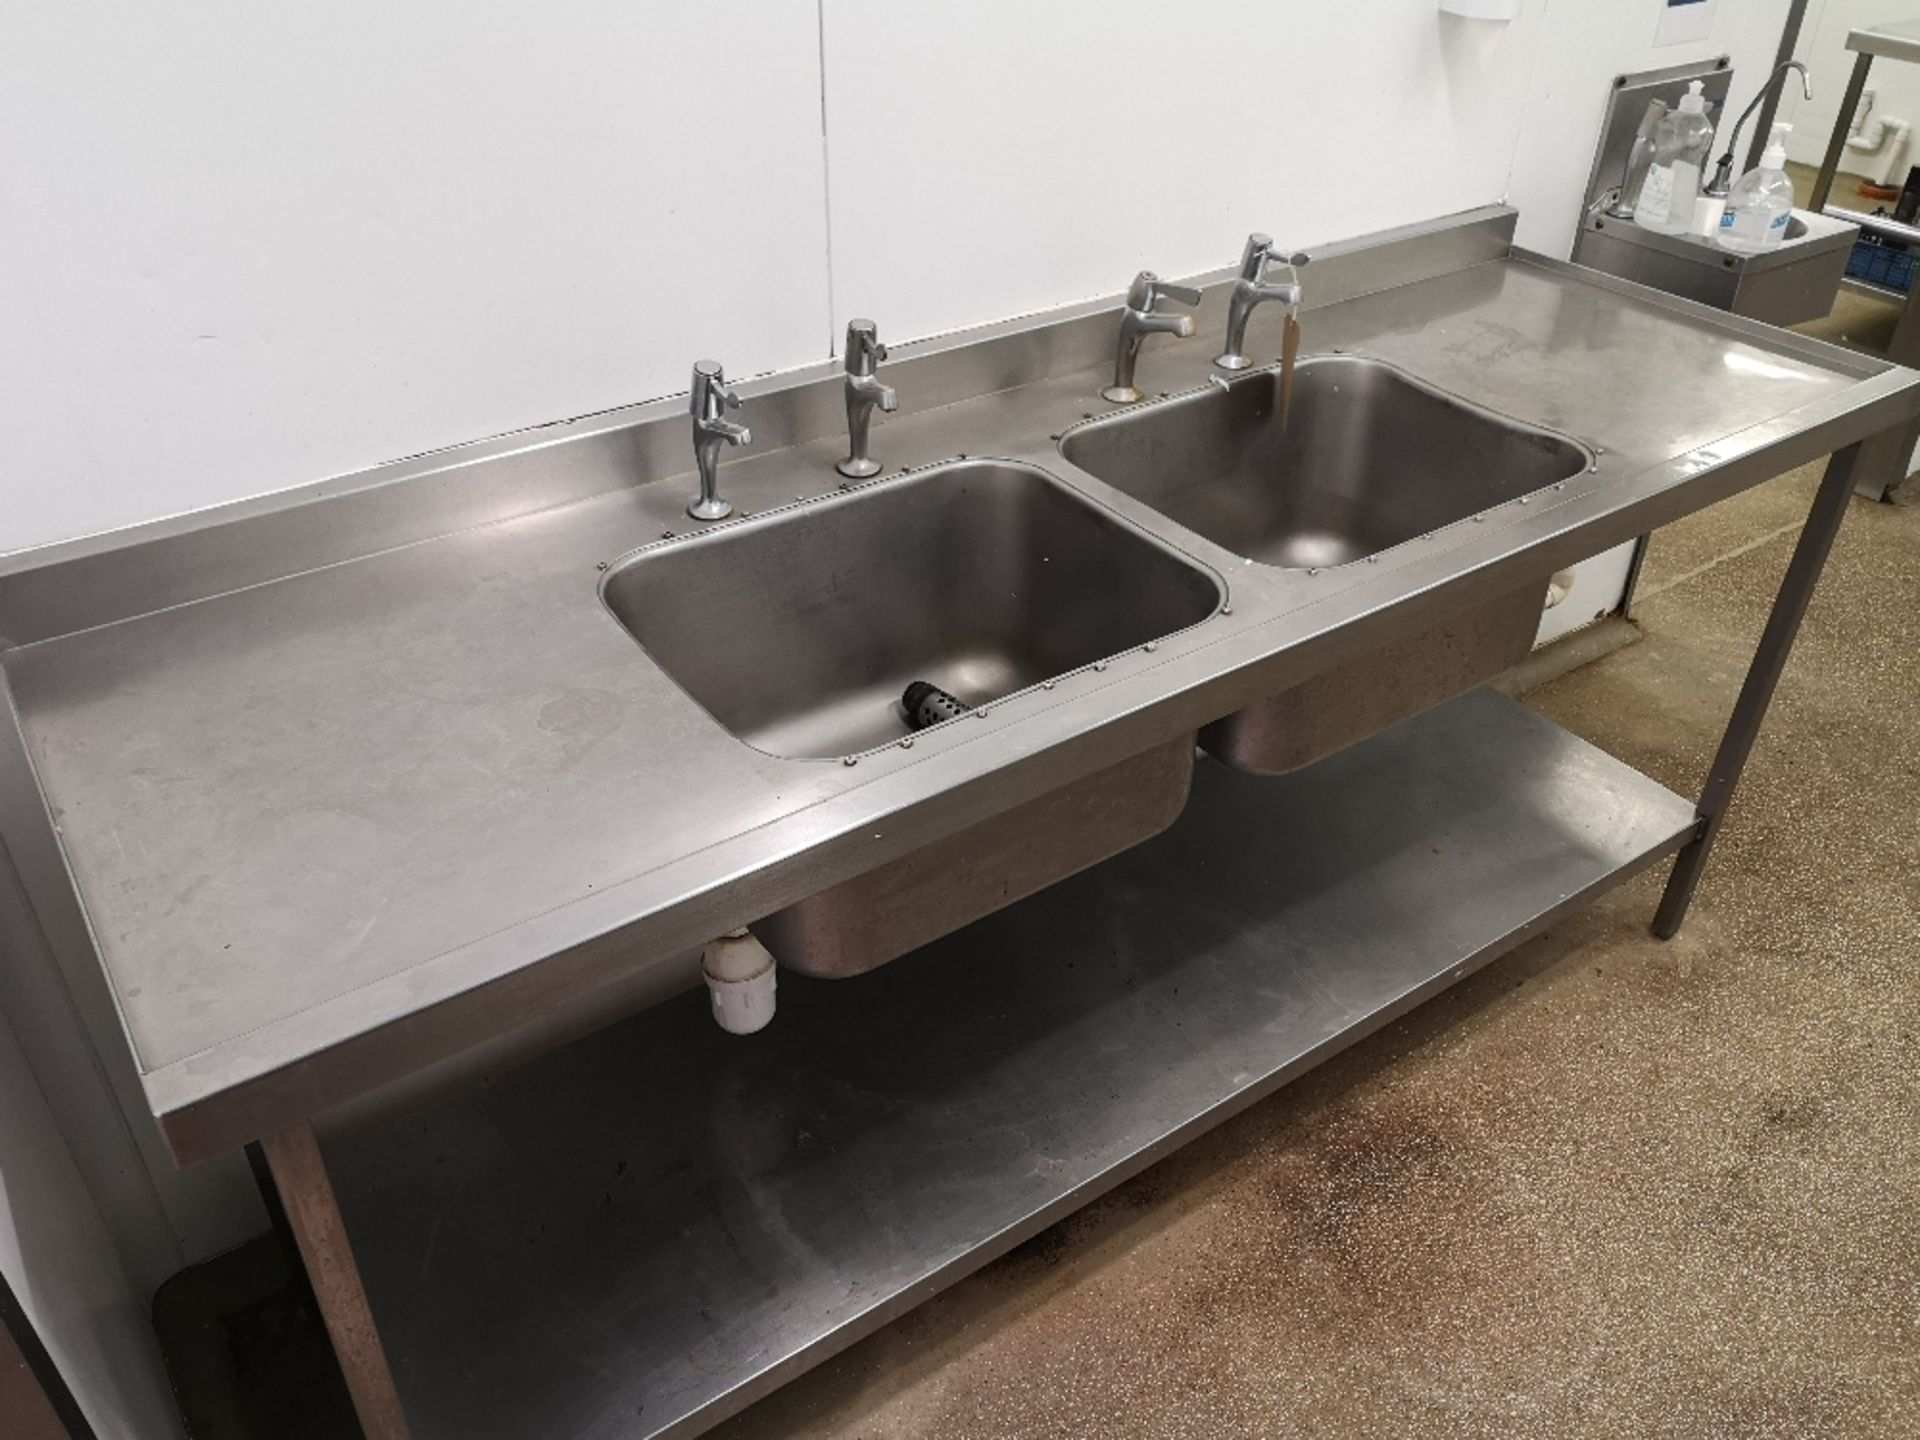 Stainless Steel Double Sink Basin Unit - Image 2 of 3